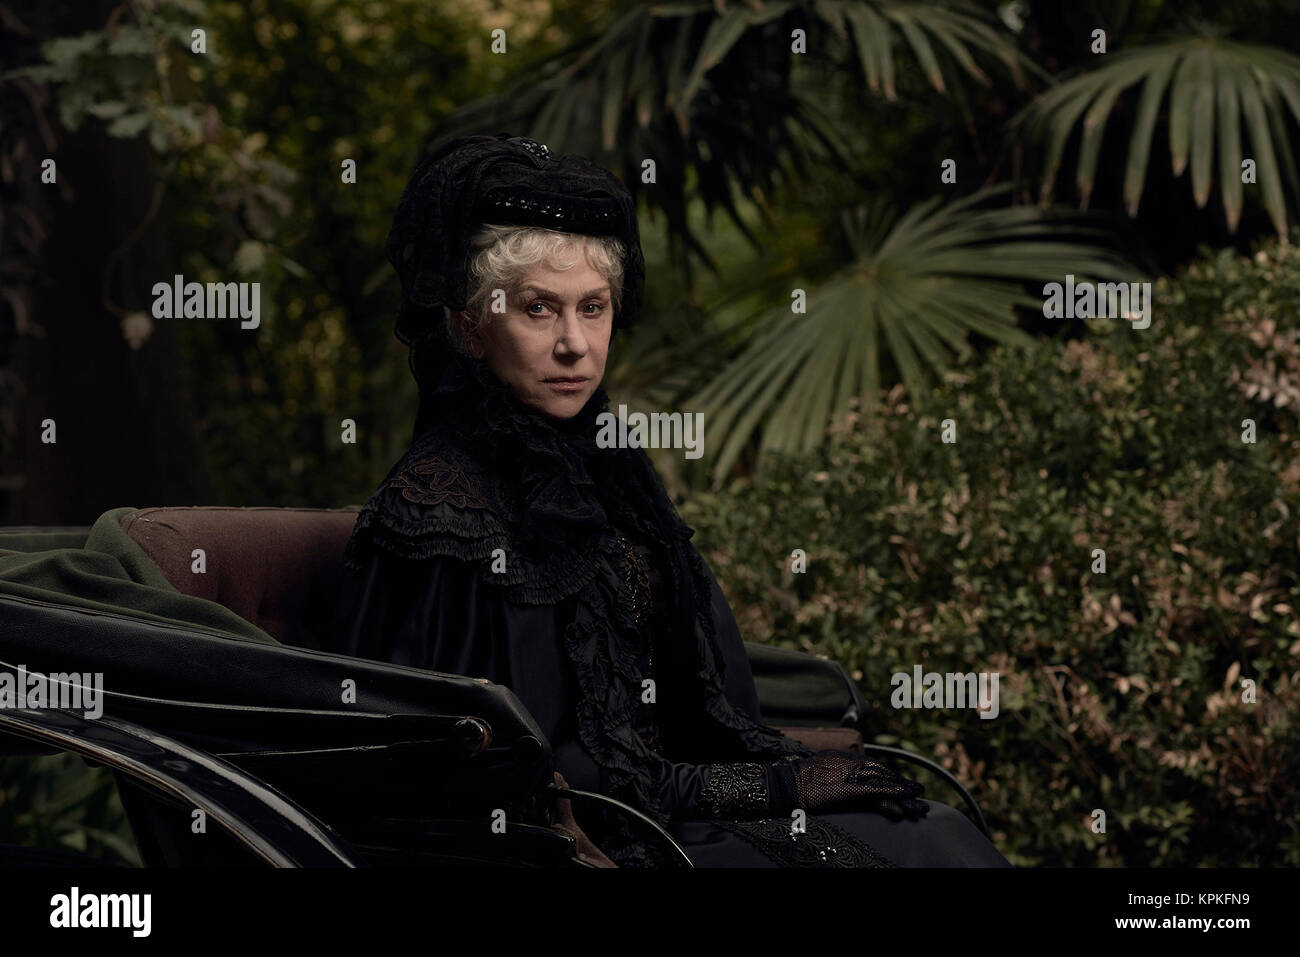 RELEASE DATE: February 2, 2018 TITLE: Winchester STUDIO: CBS Films DIRECTOR: Michael Spierig PLOT: Eccentric firearm heiress believes she is haunted by the souls of people killed by the Winchester repeating rifle. STARRING: HELEN MIRREN as Sarah Winchester. (Credit Image: © CBS Films/Entertainment Pictures) Stock Photo